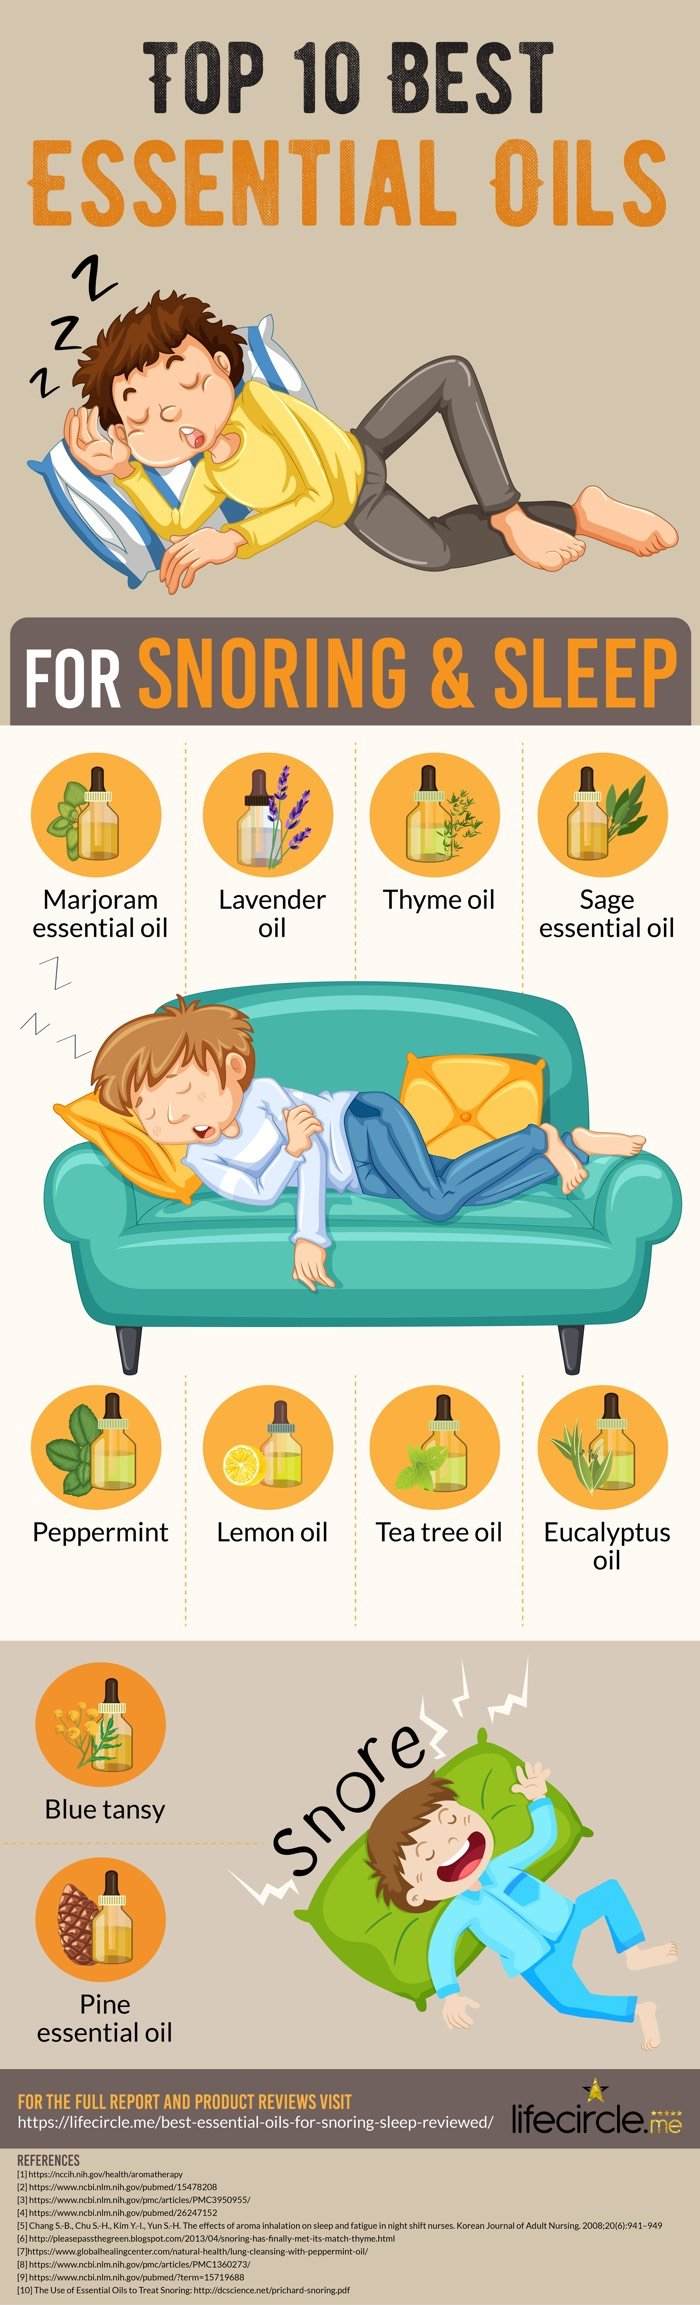 best essential oil for snoring and sleeping